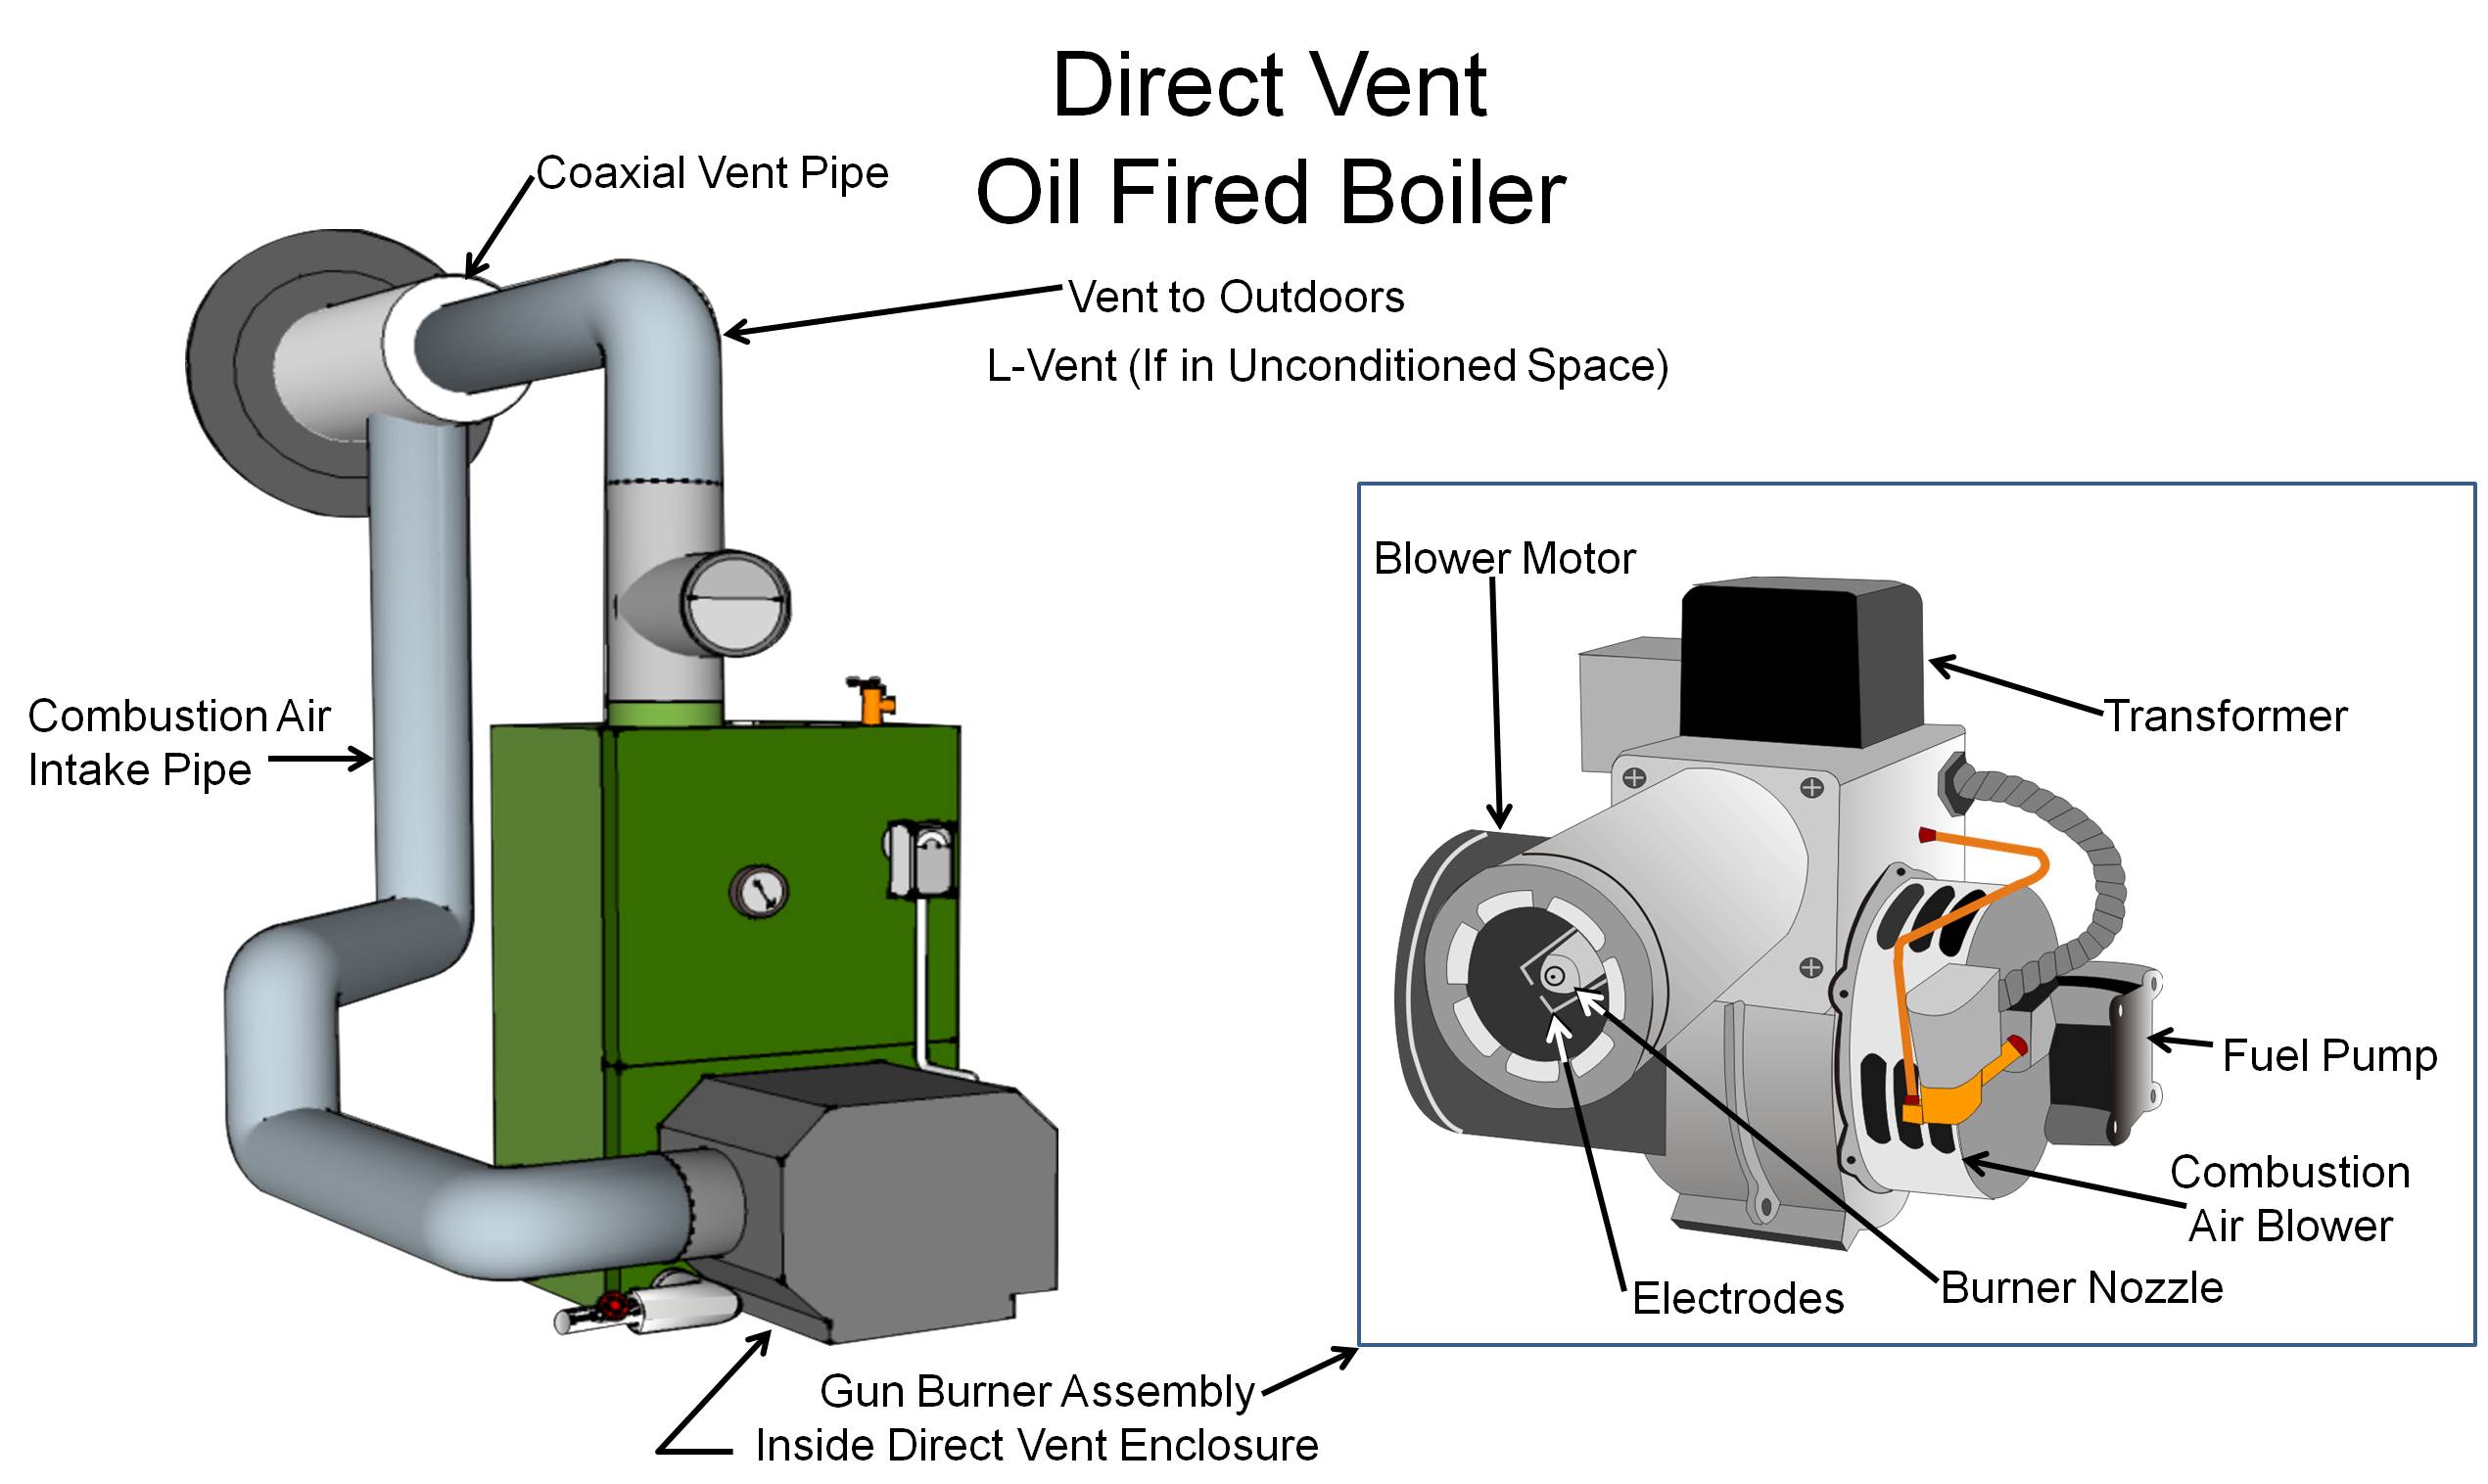 category-iii-oil-fired-sealed-combustion-boiler-configured-as-a-direct